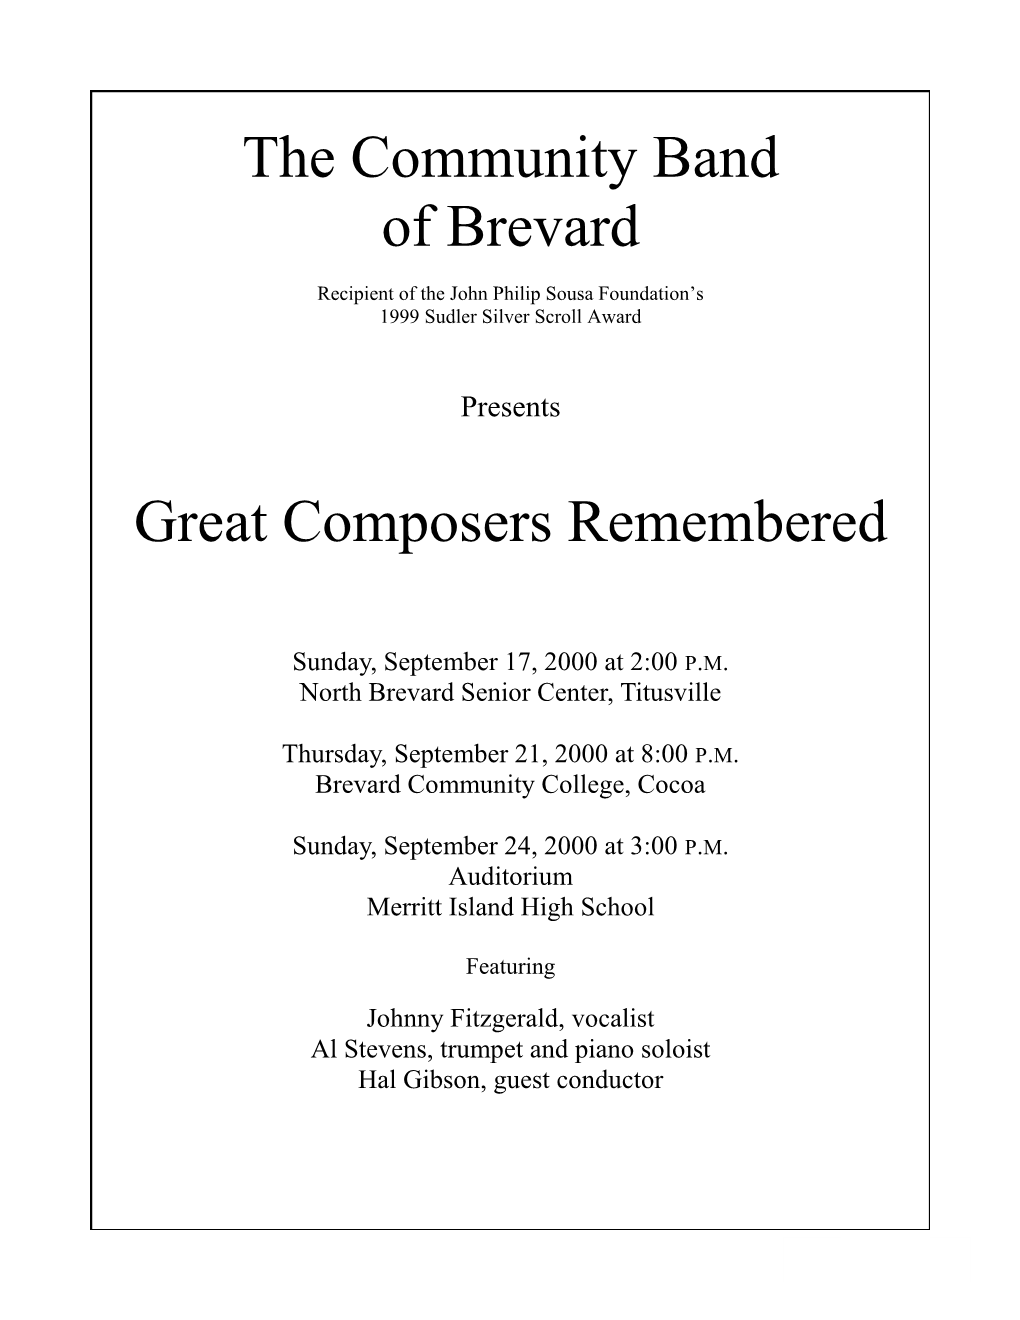 The Community Band of Brevard Great Composers Remembered